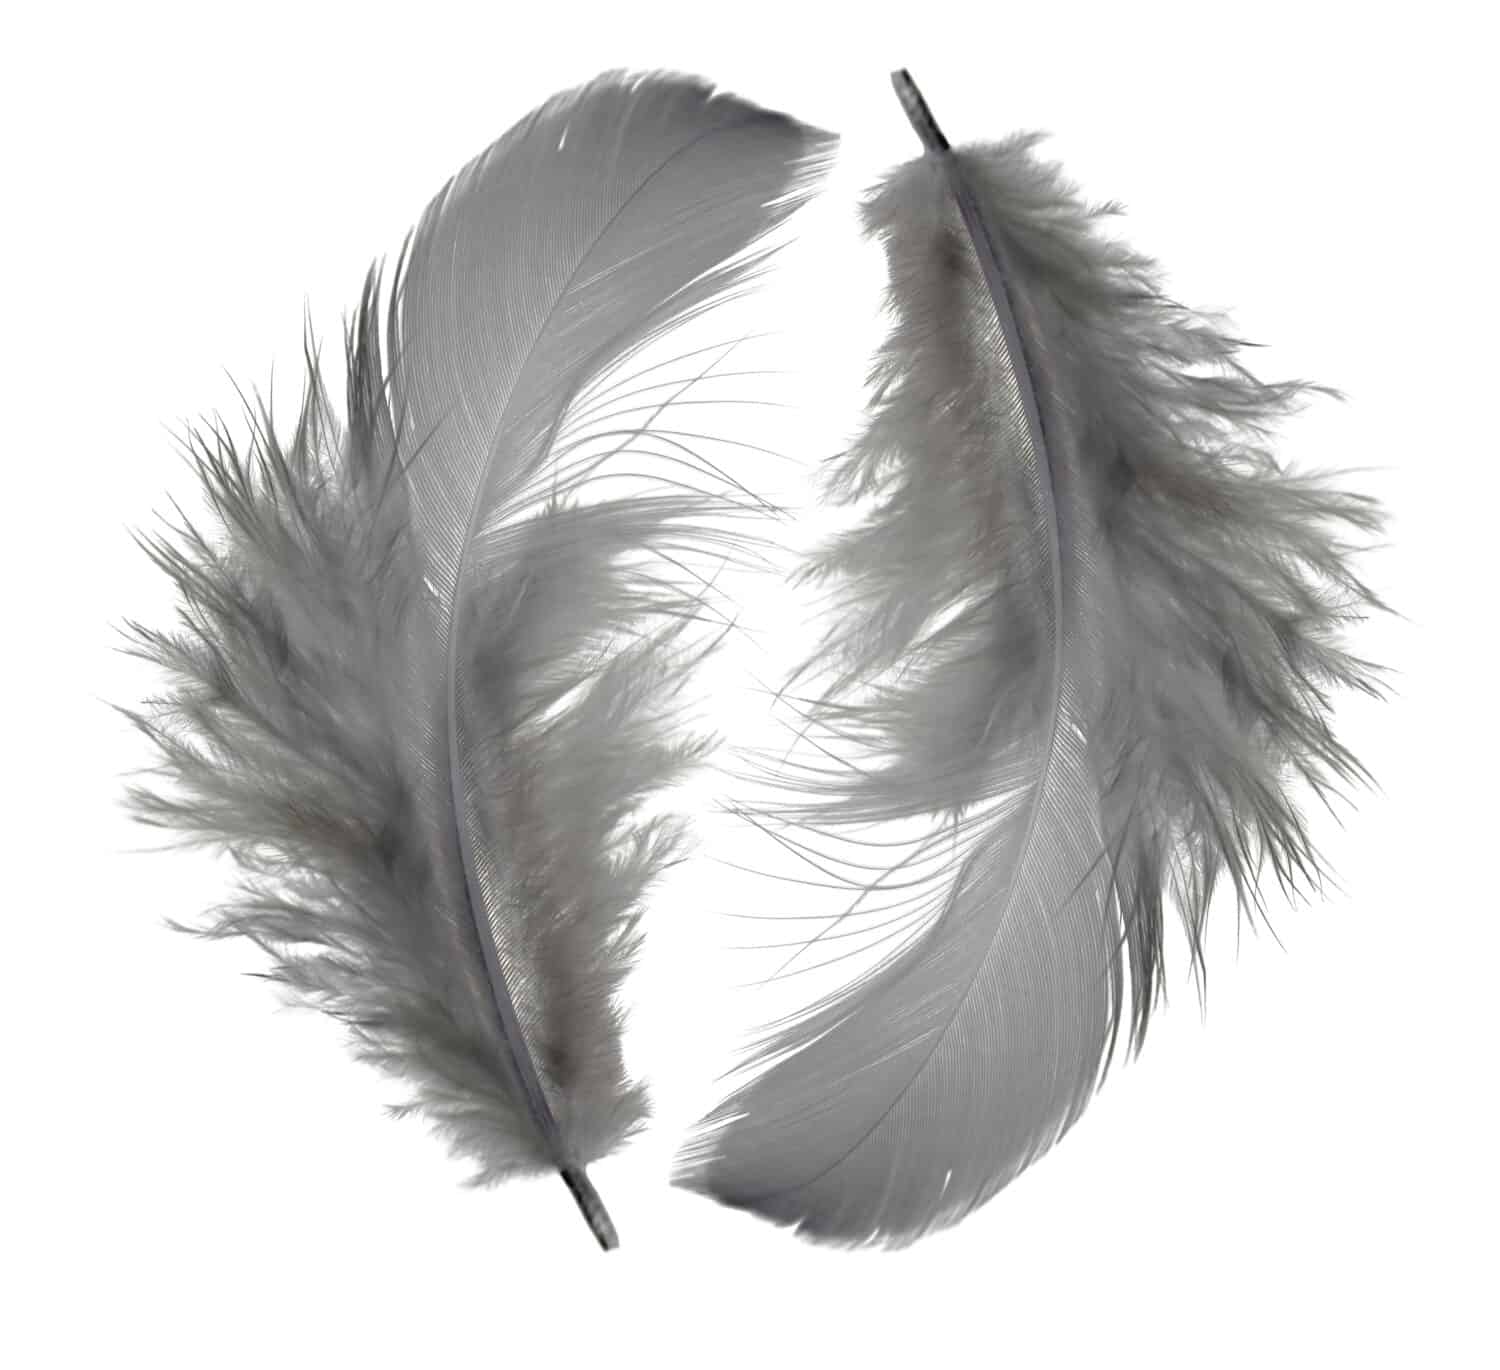 Pink Feather Meaning and Symbolism - Color Meanings